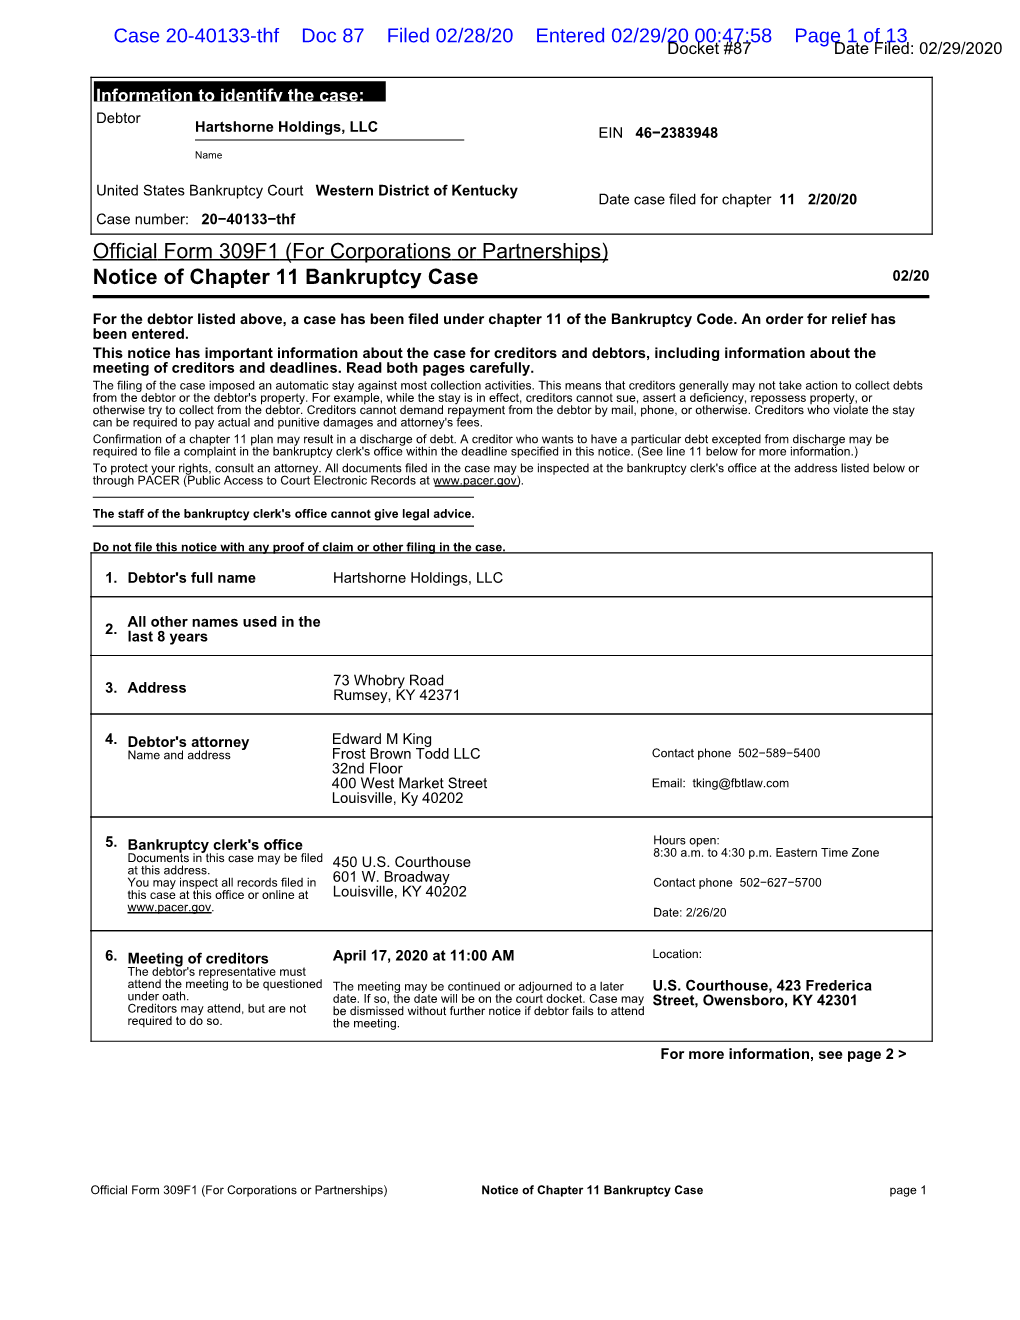 Official Form 309F1 (For Corporations Or Partnerships) Notice of Chapter 11 Bankruptcy Case 02/20